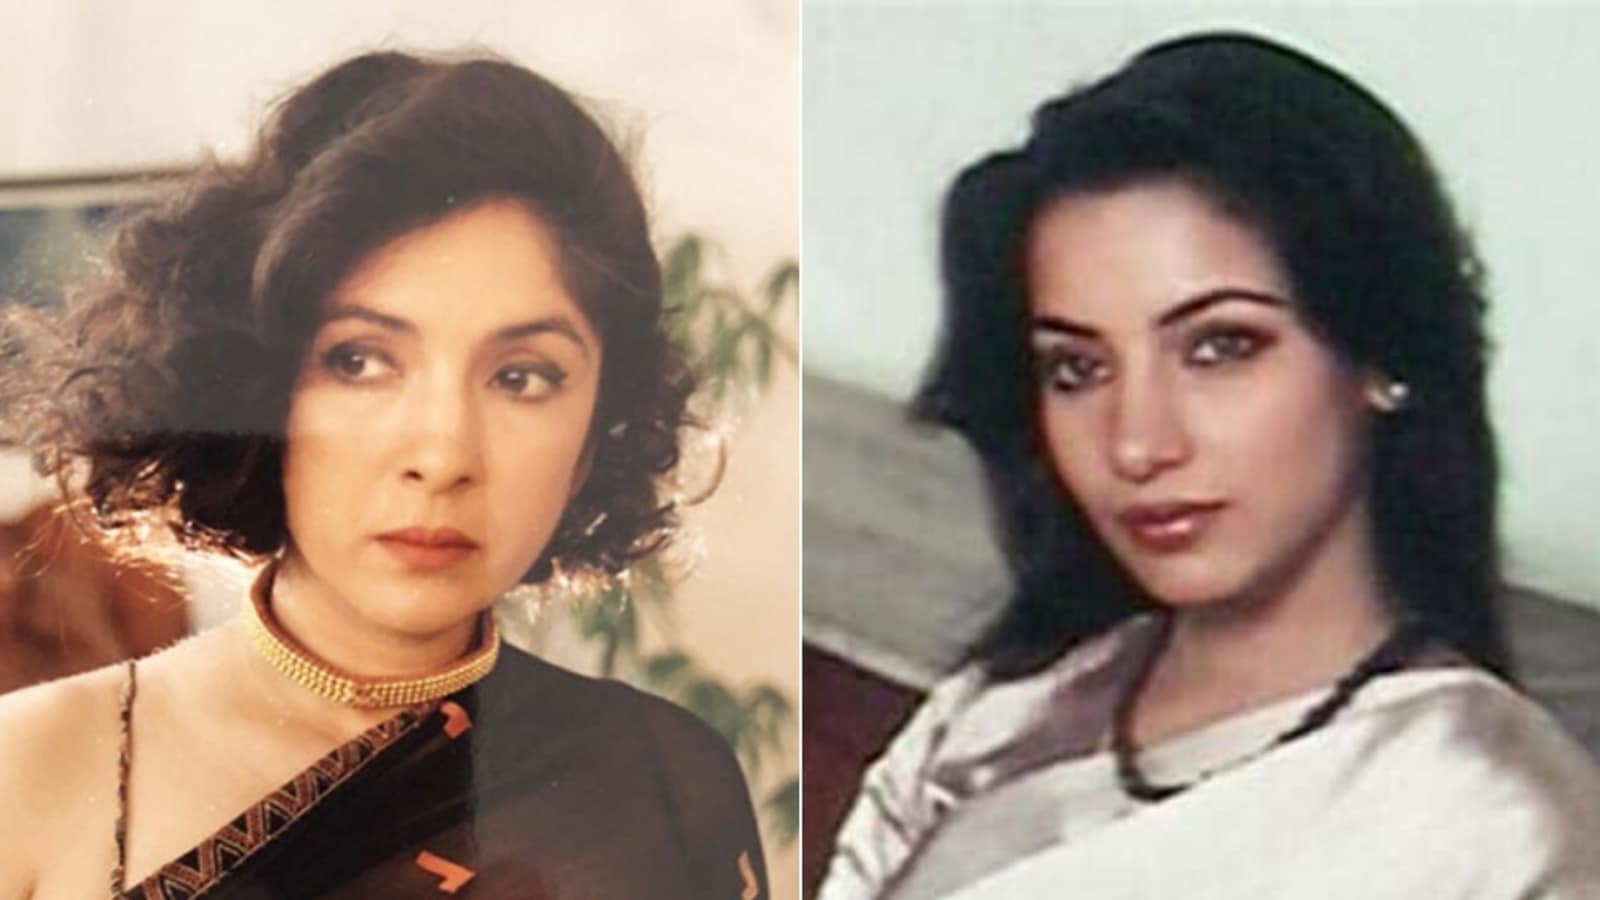 Neena Gupta says she was ‘jealous’ of Shabana Azmi: ‘I used to get thrown out of films, she used to get good roles’